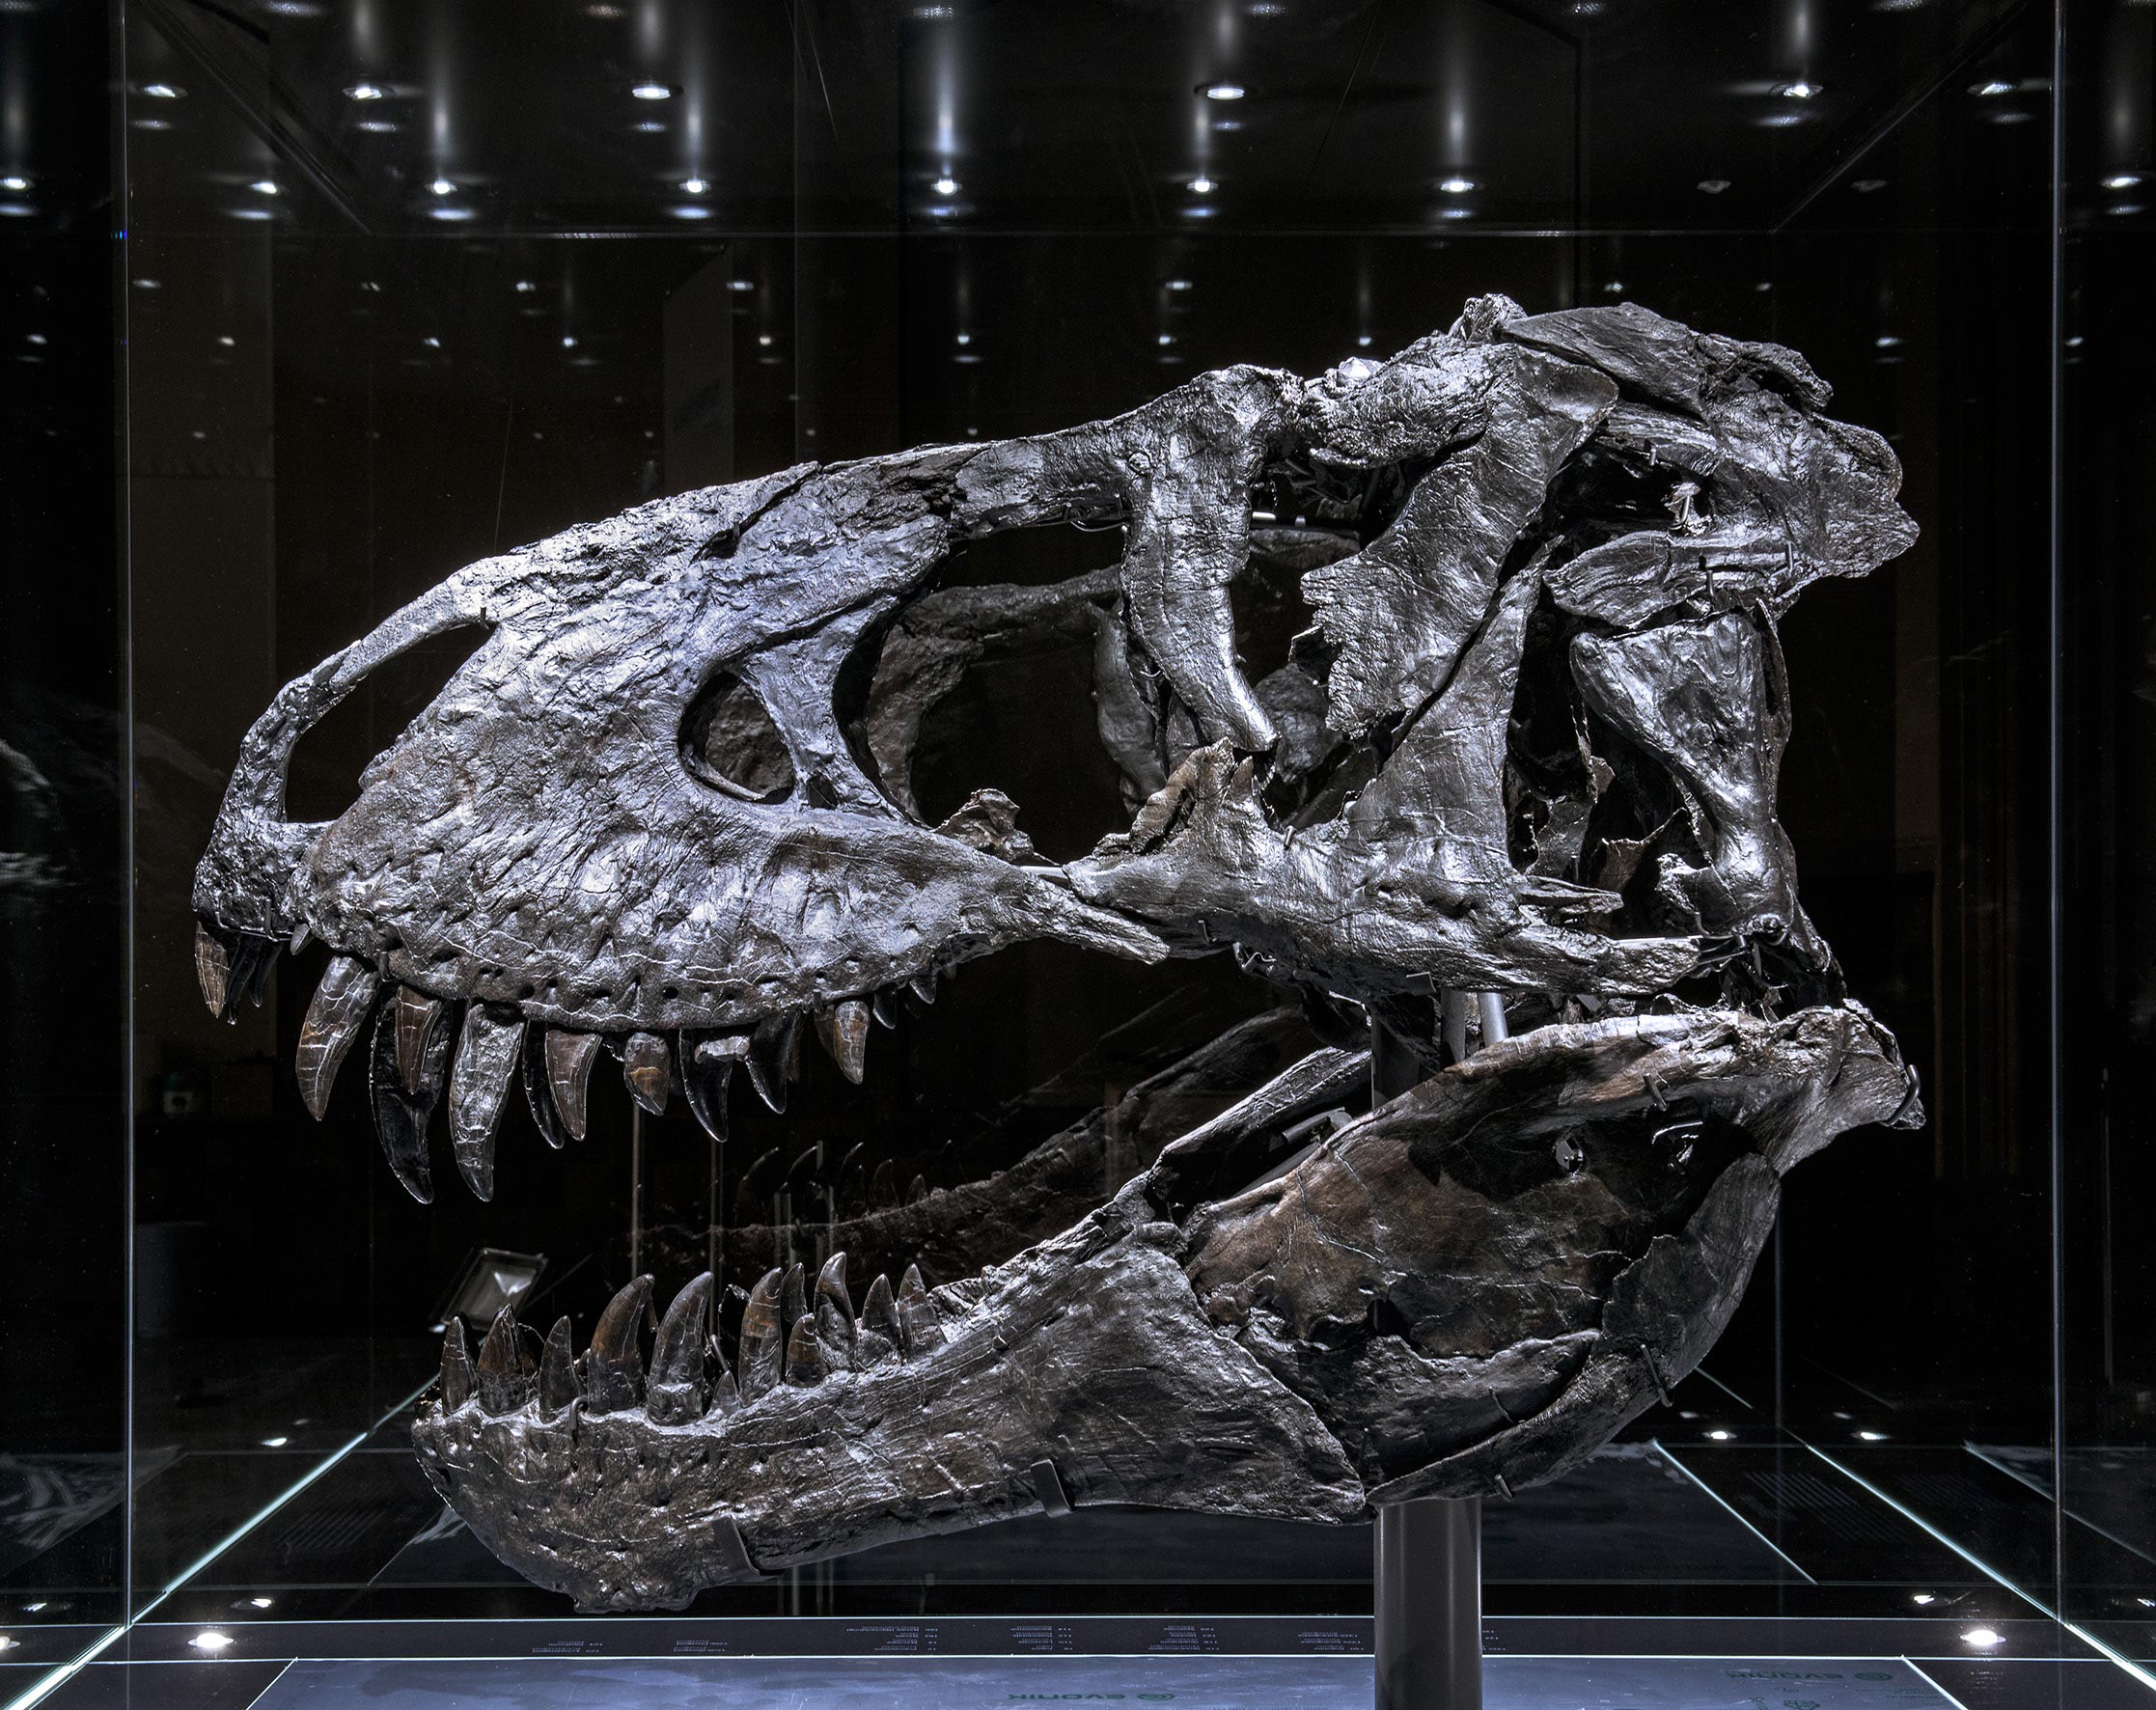 Bold Theory” That T. rex Was 3 Species Rebutted – “Tyrannosaurus rex  Remains the One True King of the Dinosaurs”